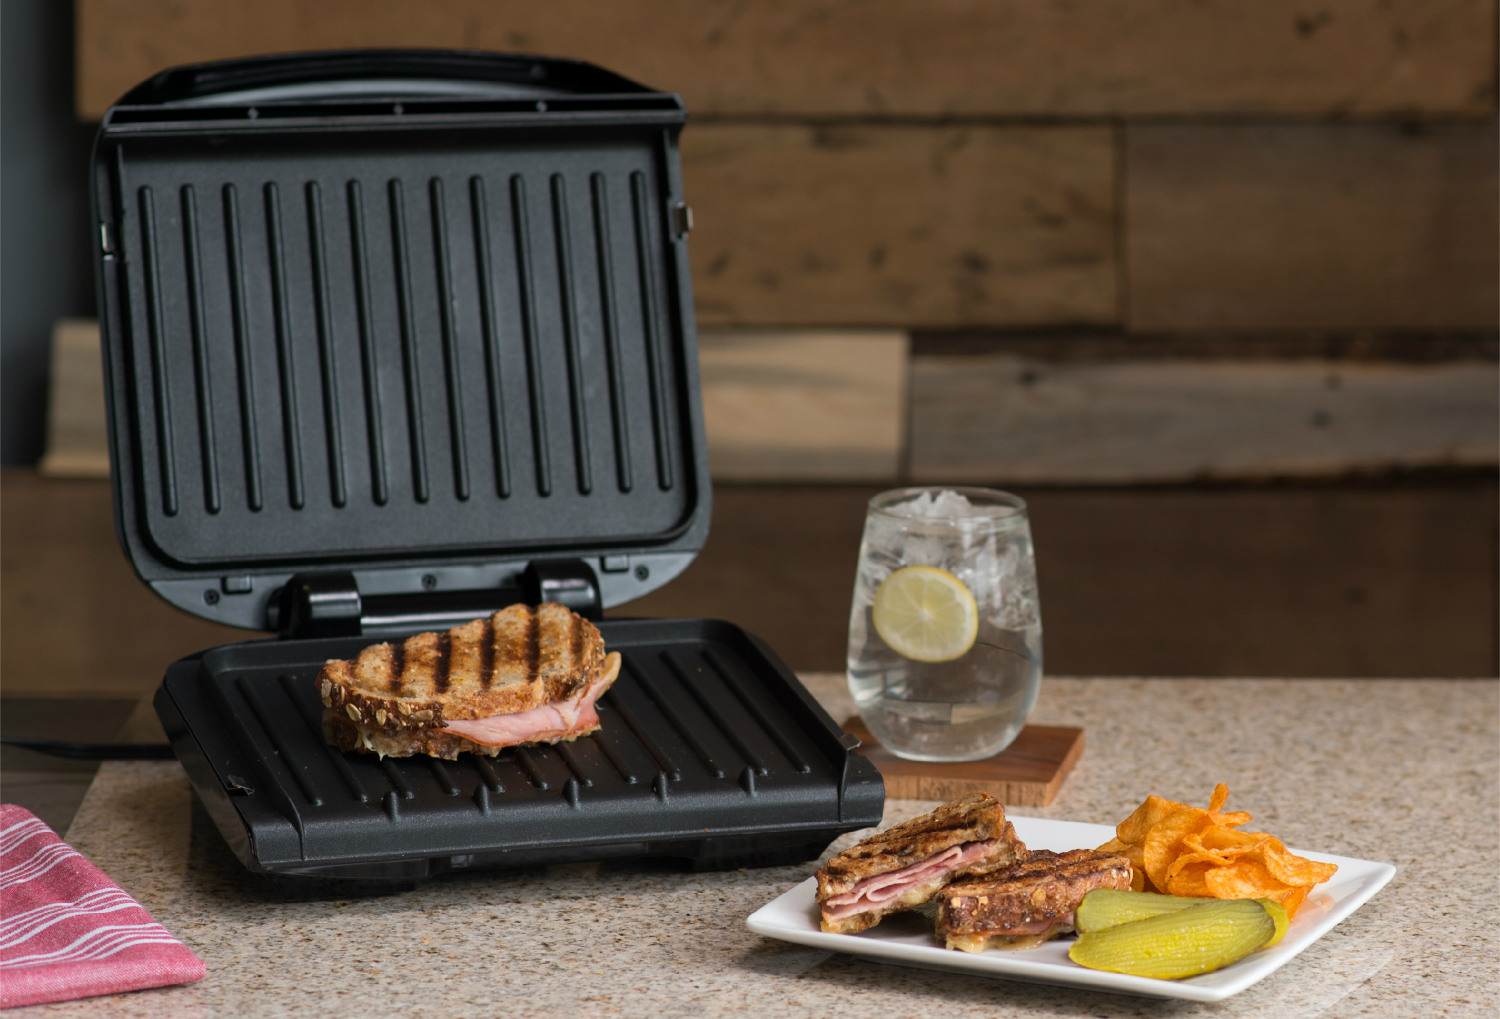 NEW George Foreman 5-serving Removable Plate Electric Indoor 